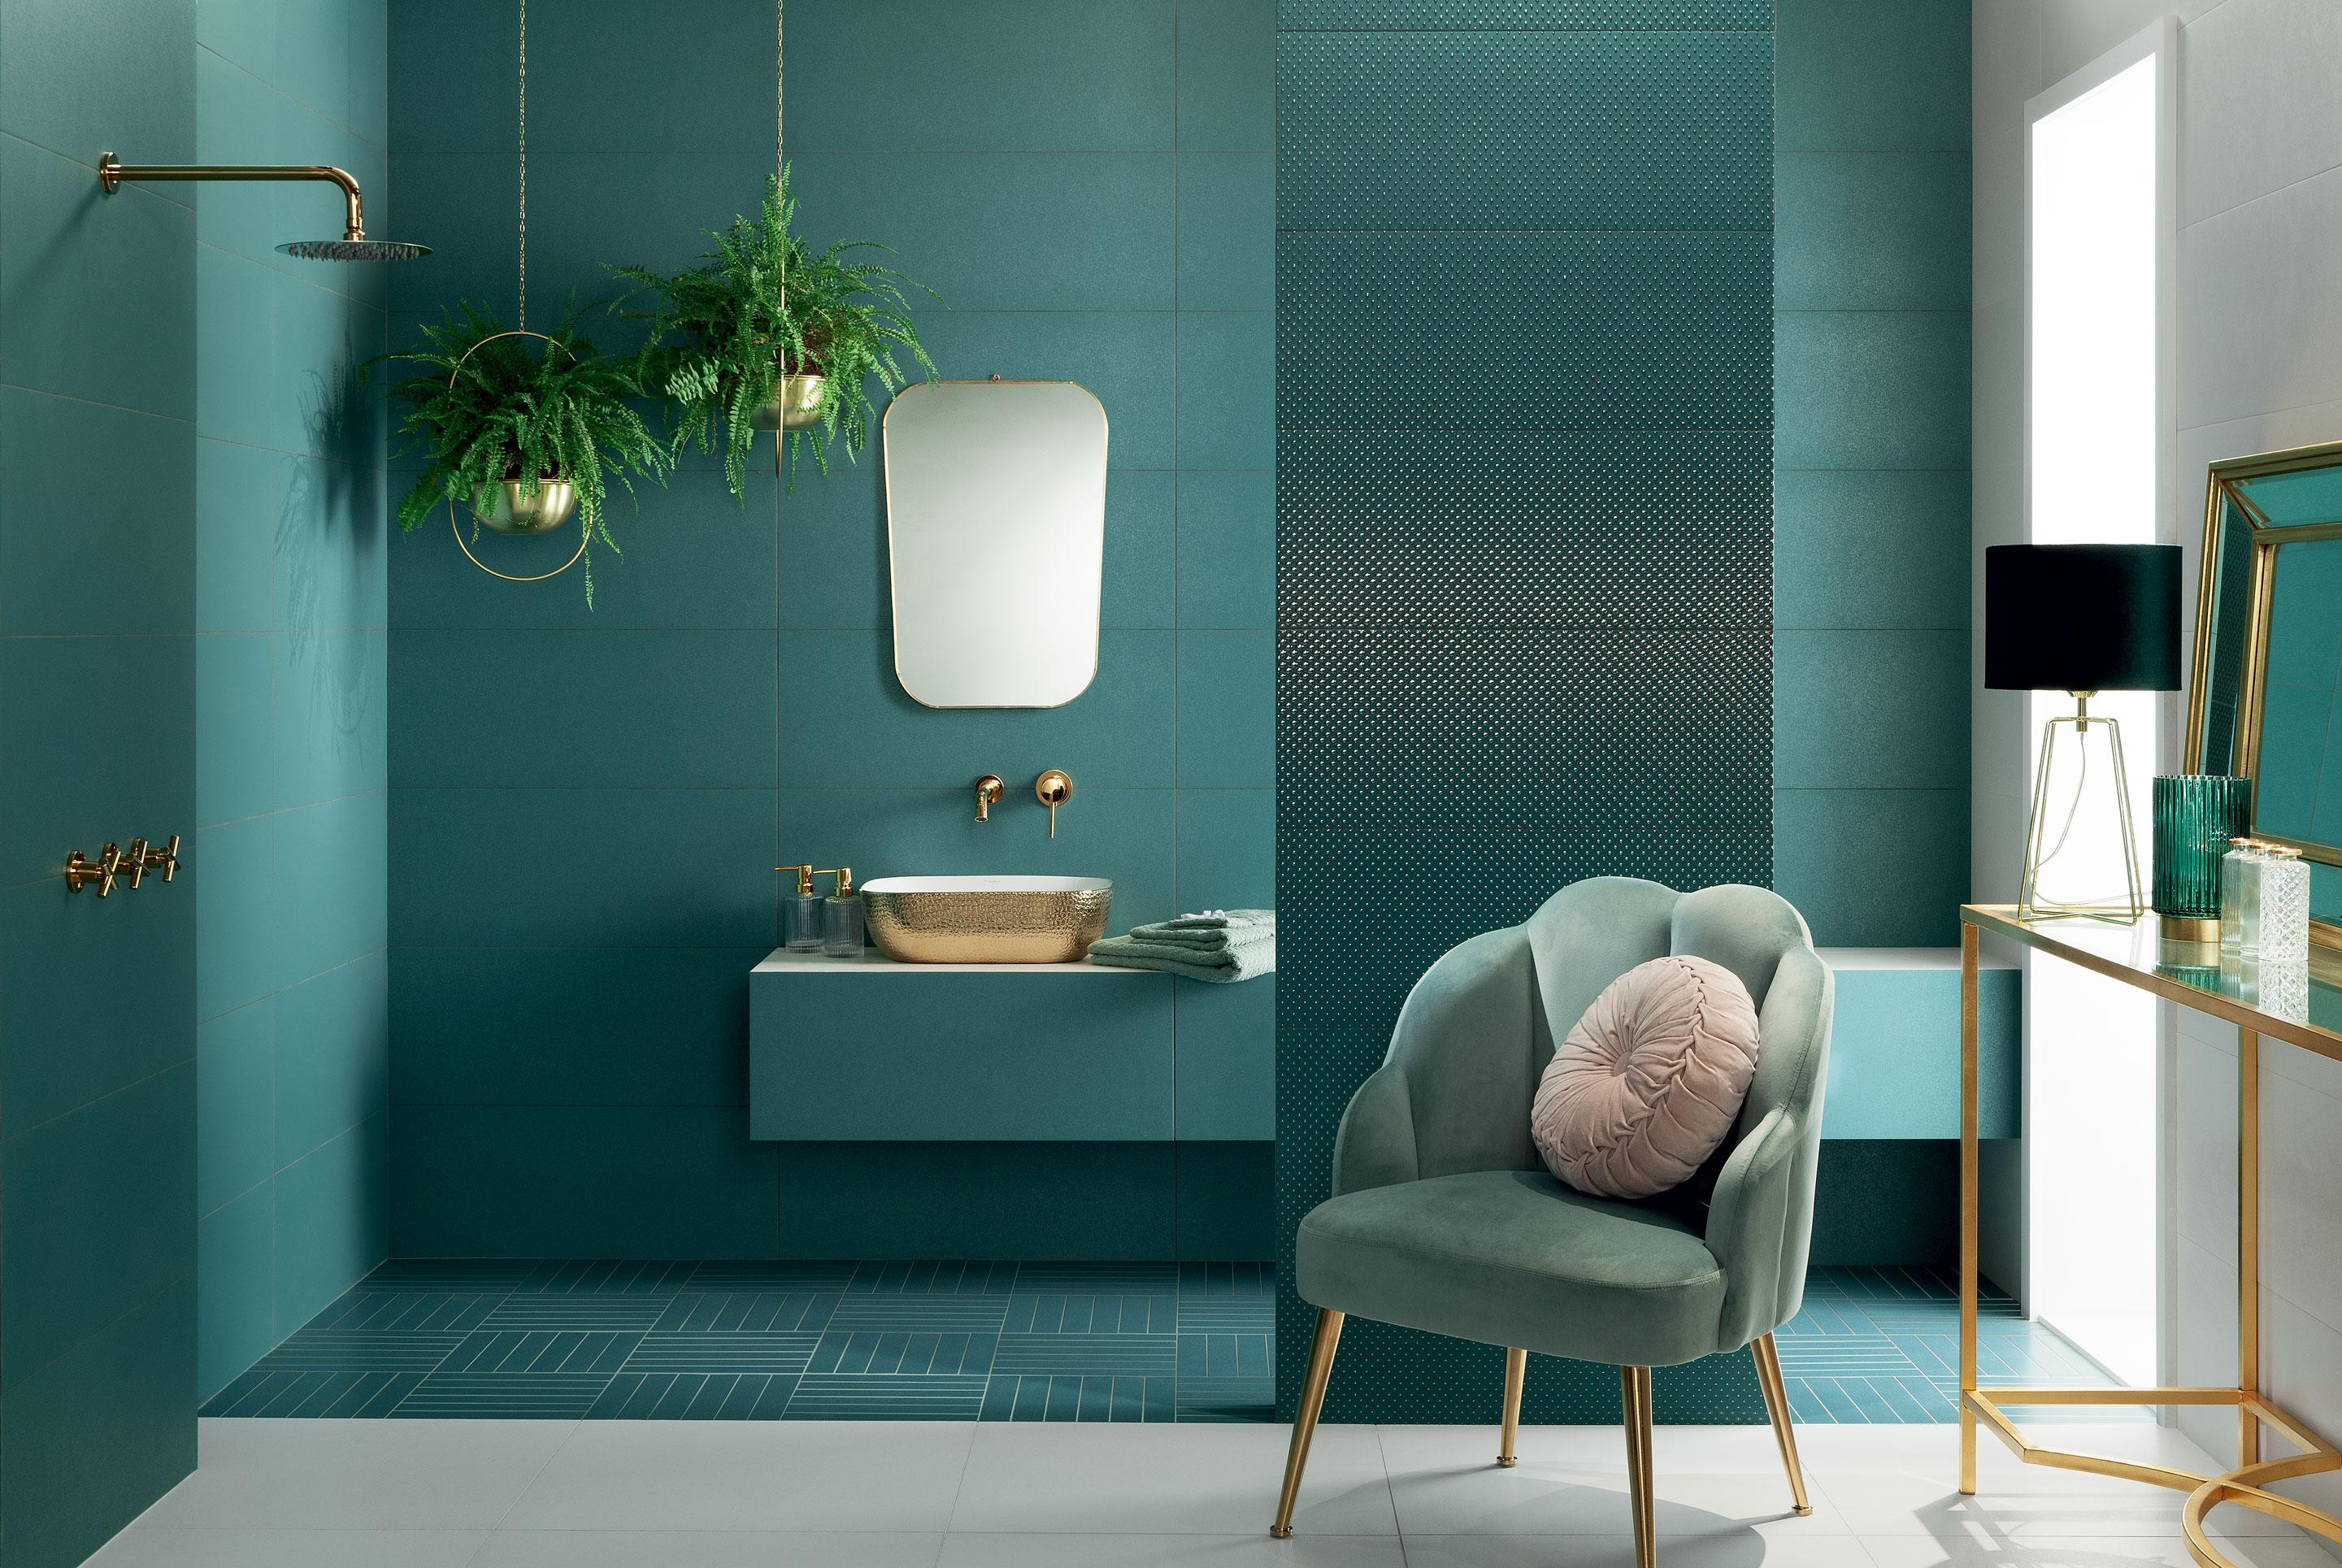 MY TONES - SOOTHING DEPTHS OF BLUE AND GREEN WITH ELEGANT EMBELLISHMENTS IN THE BACKGROUND